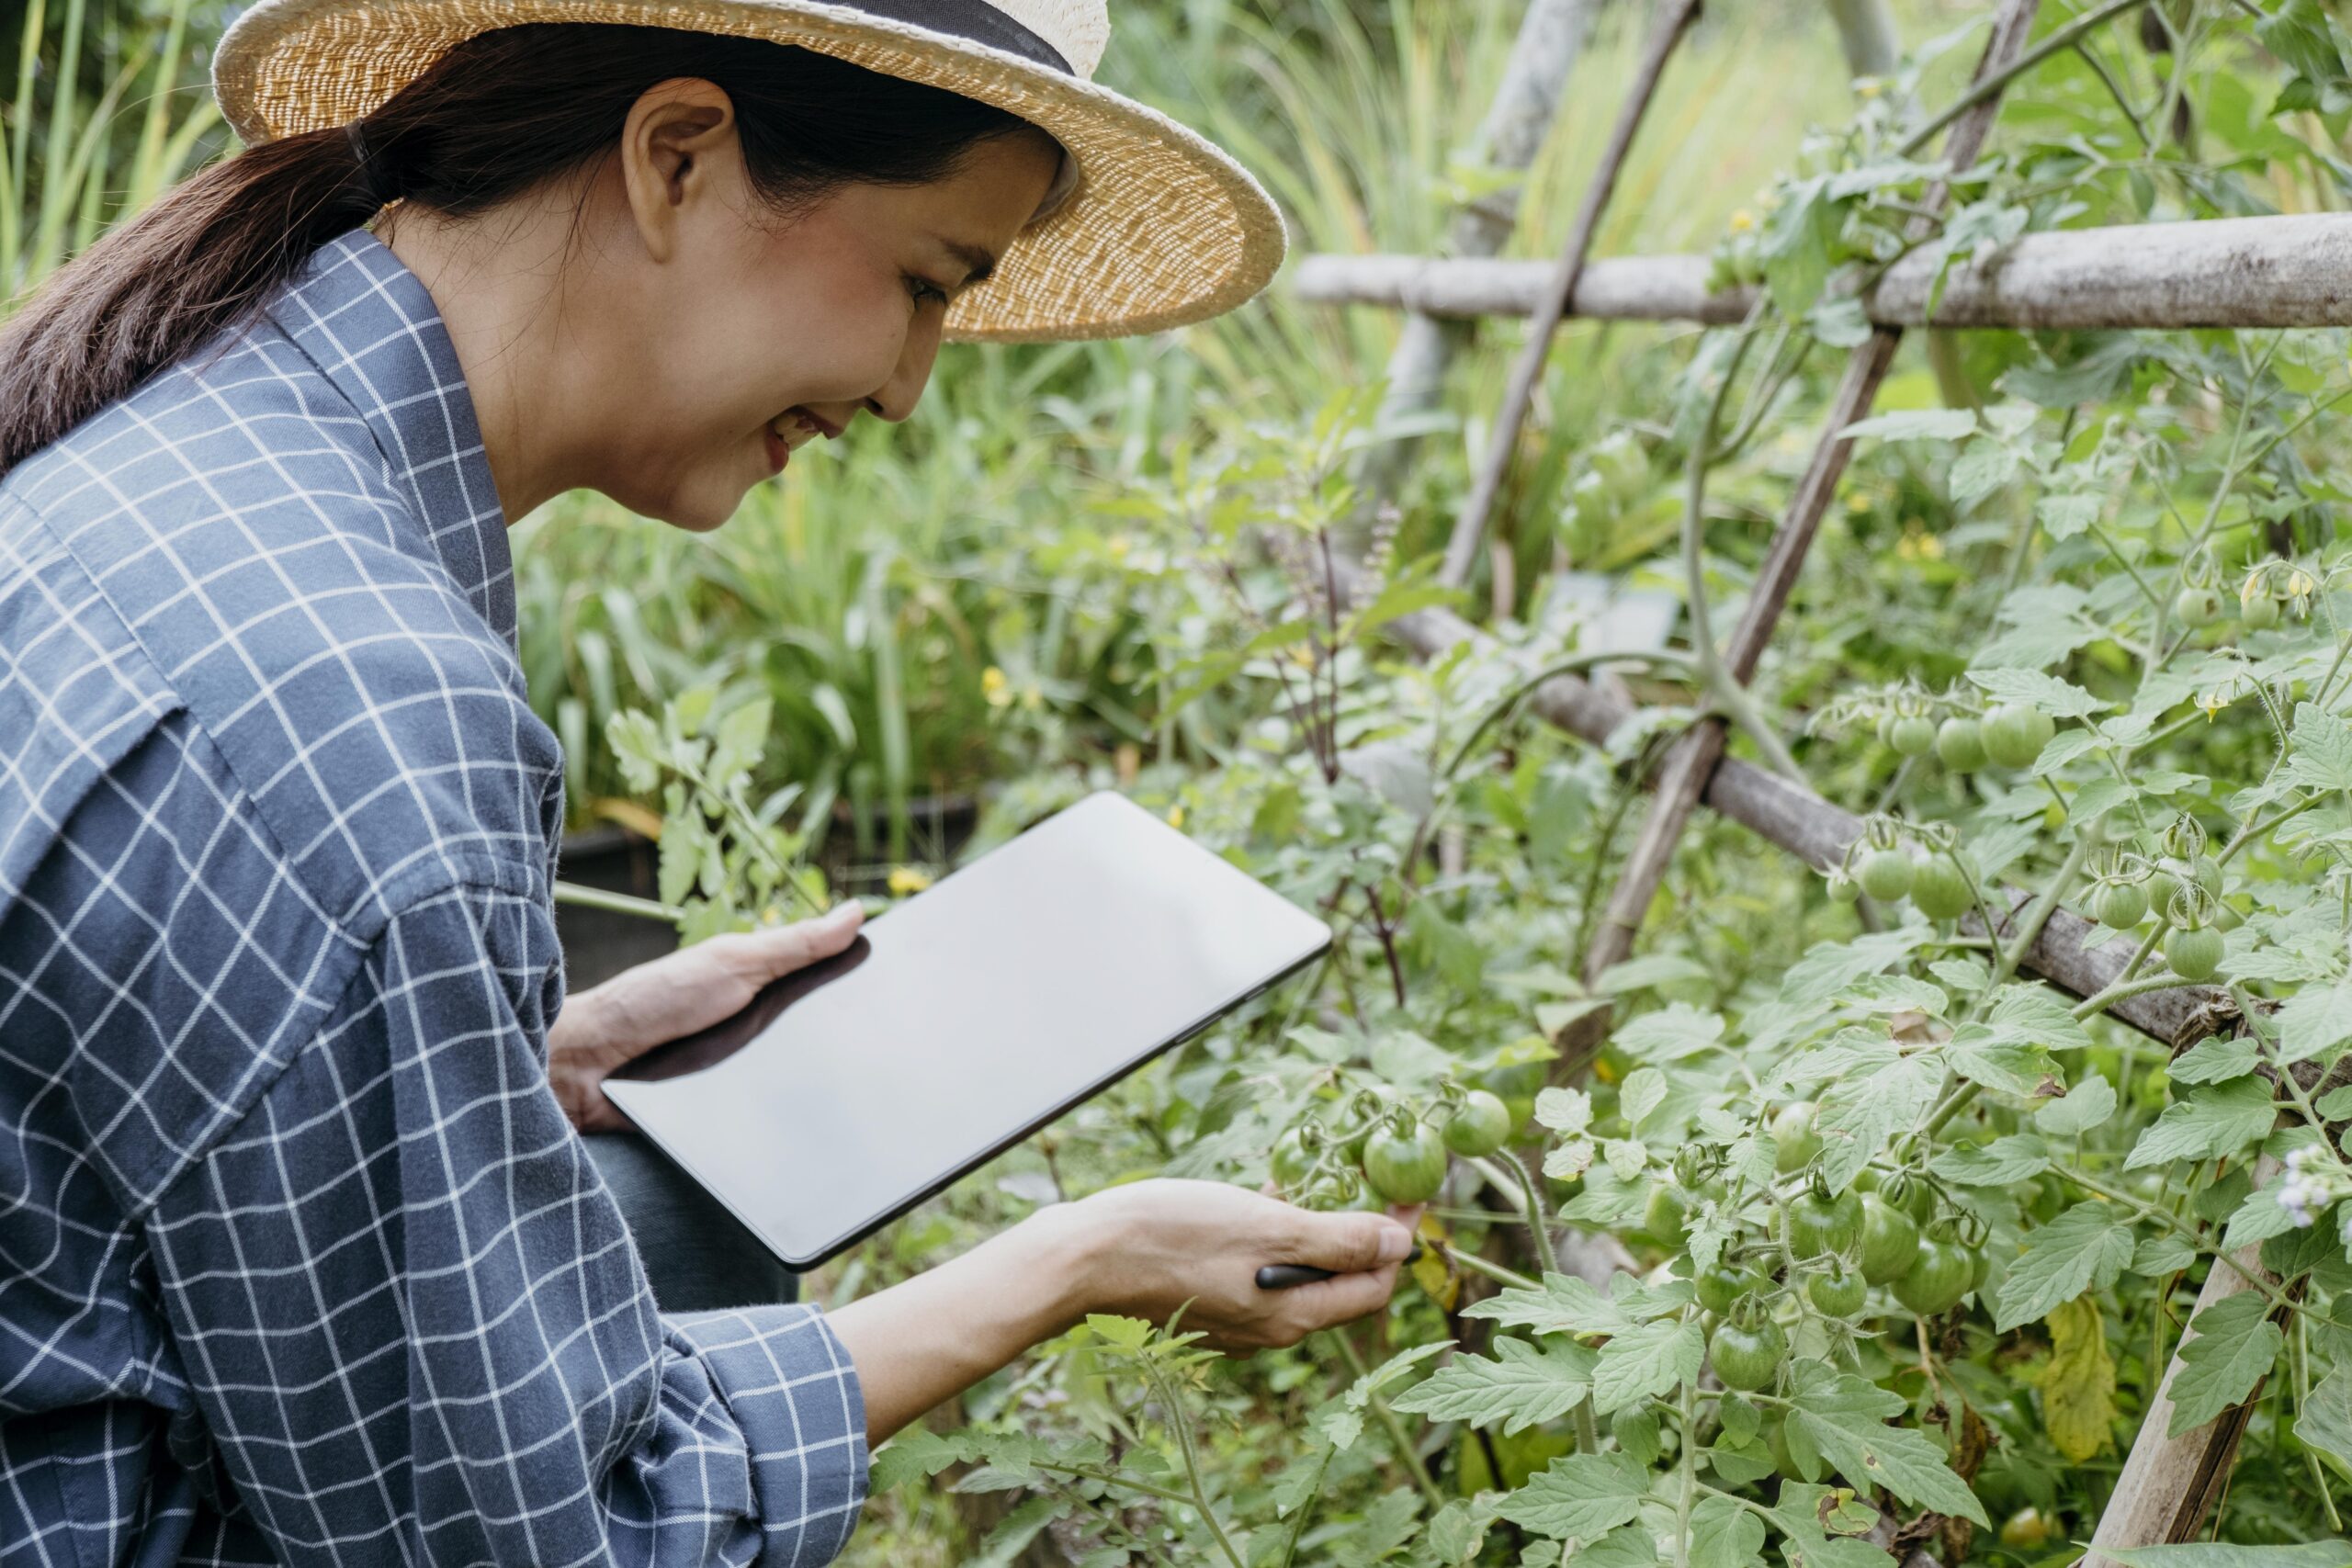 Techcoop Raises $5 Million to Support Smallholder Farmers and Agri-SMEs in Vietnam